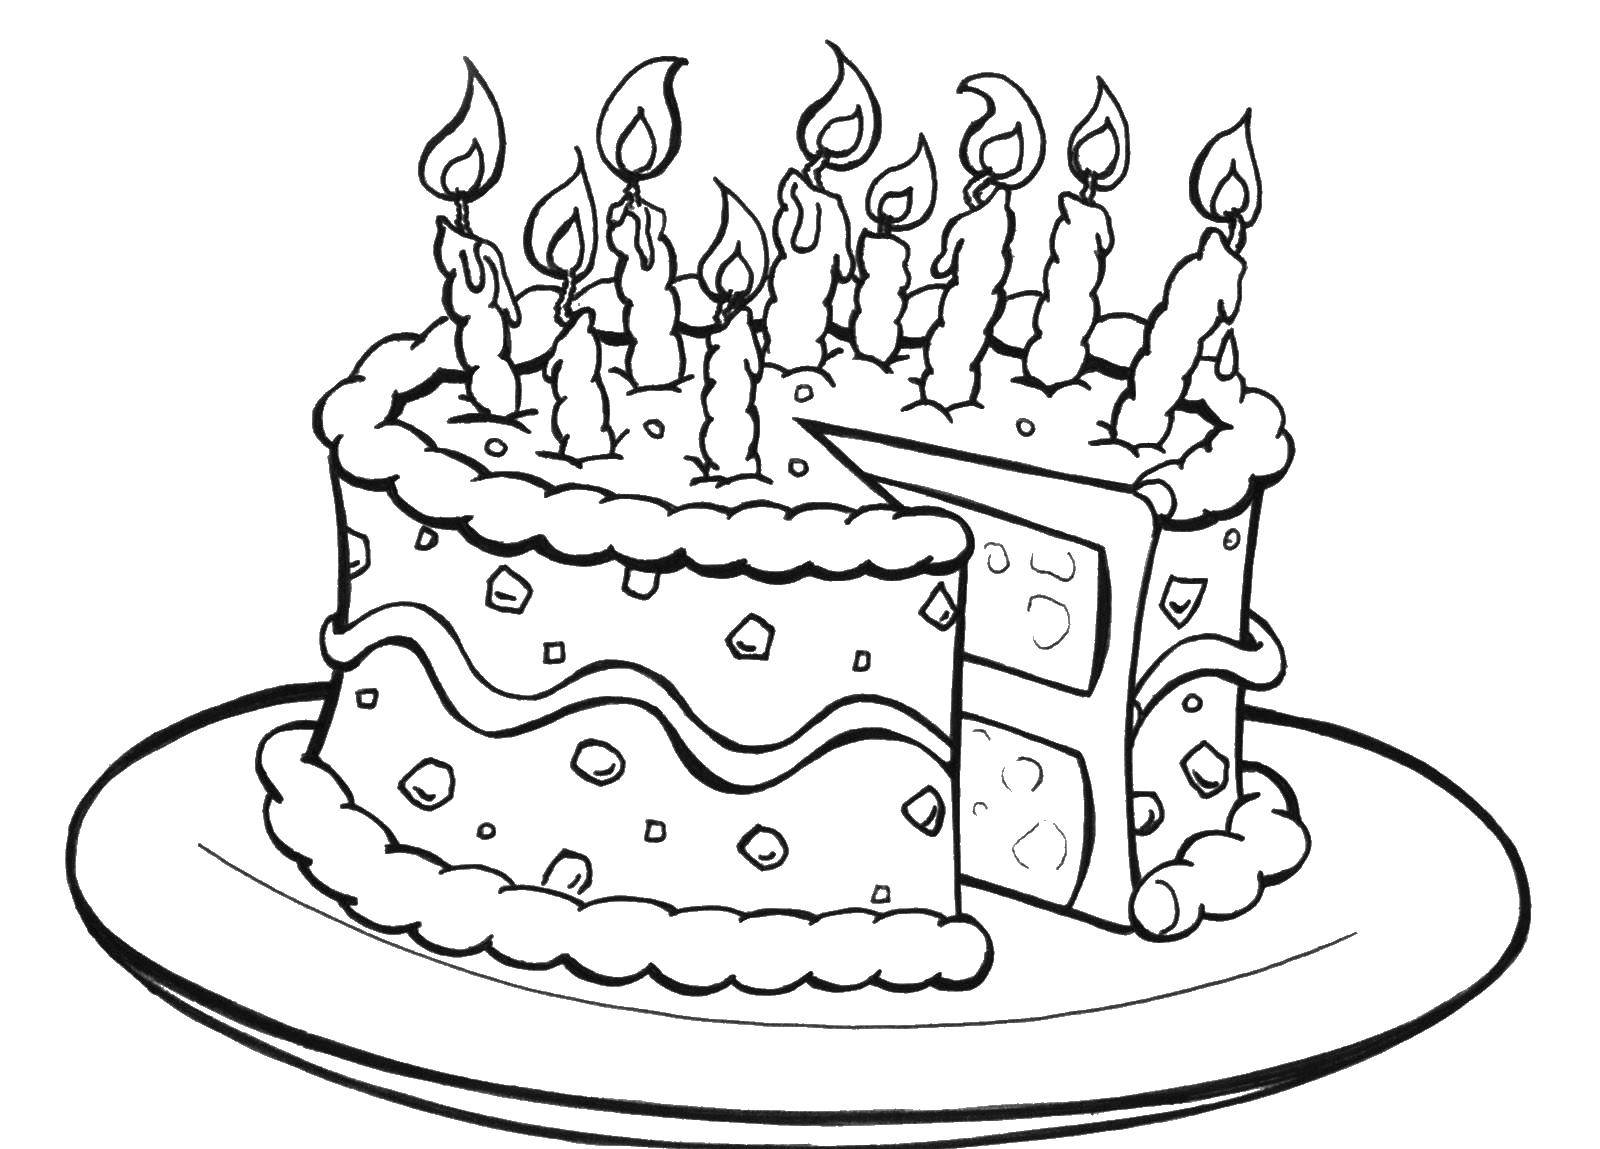 Coloring Sliced cake with candles. Category cakes. Tags:  cake, candles, plate.